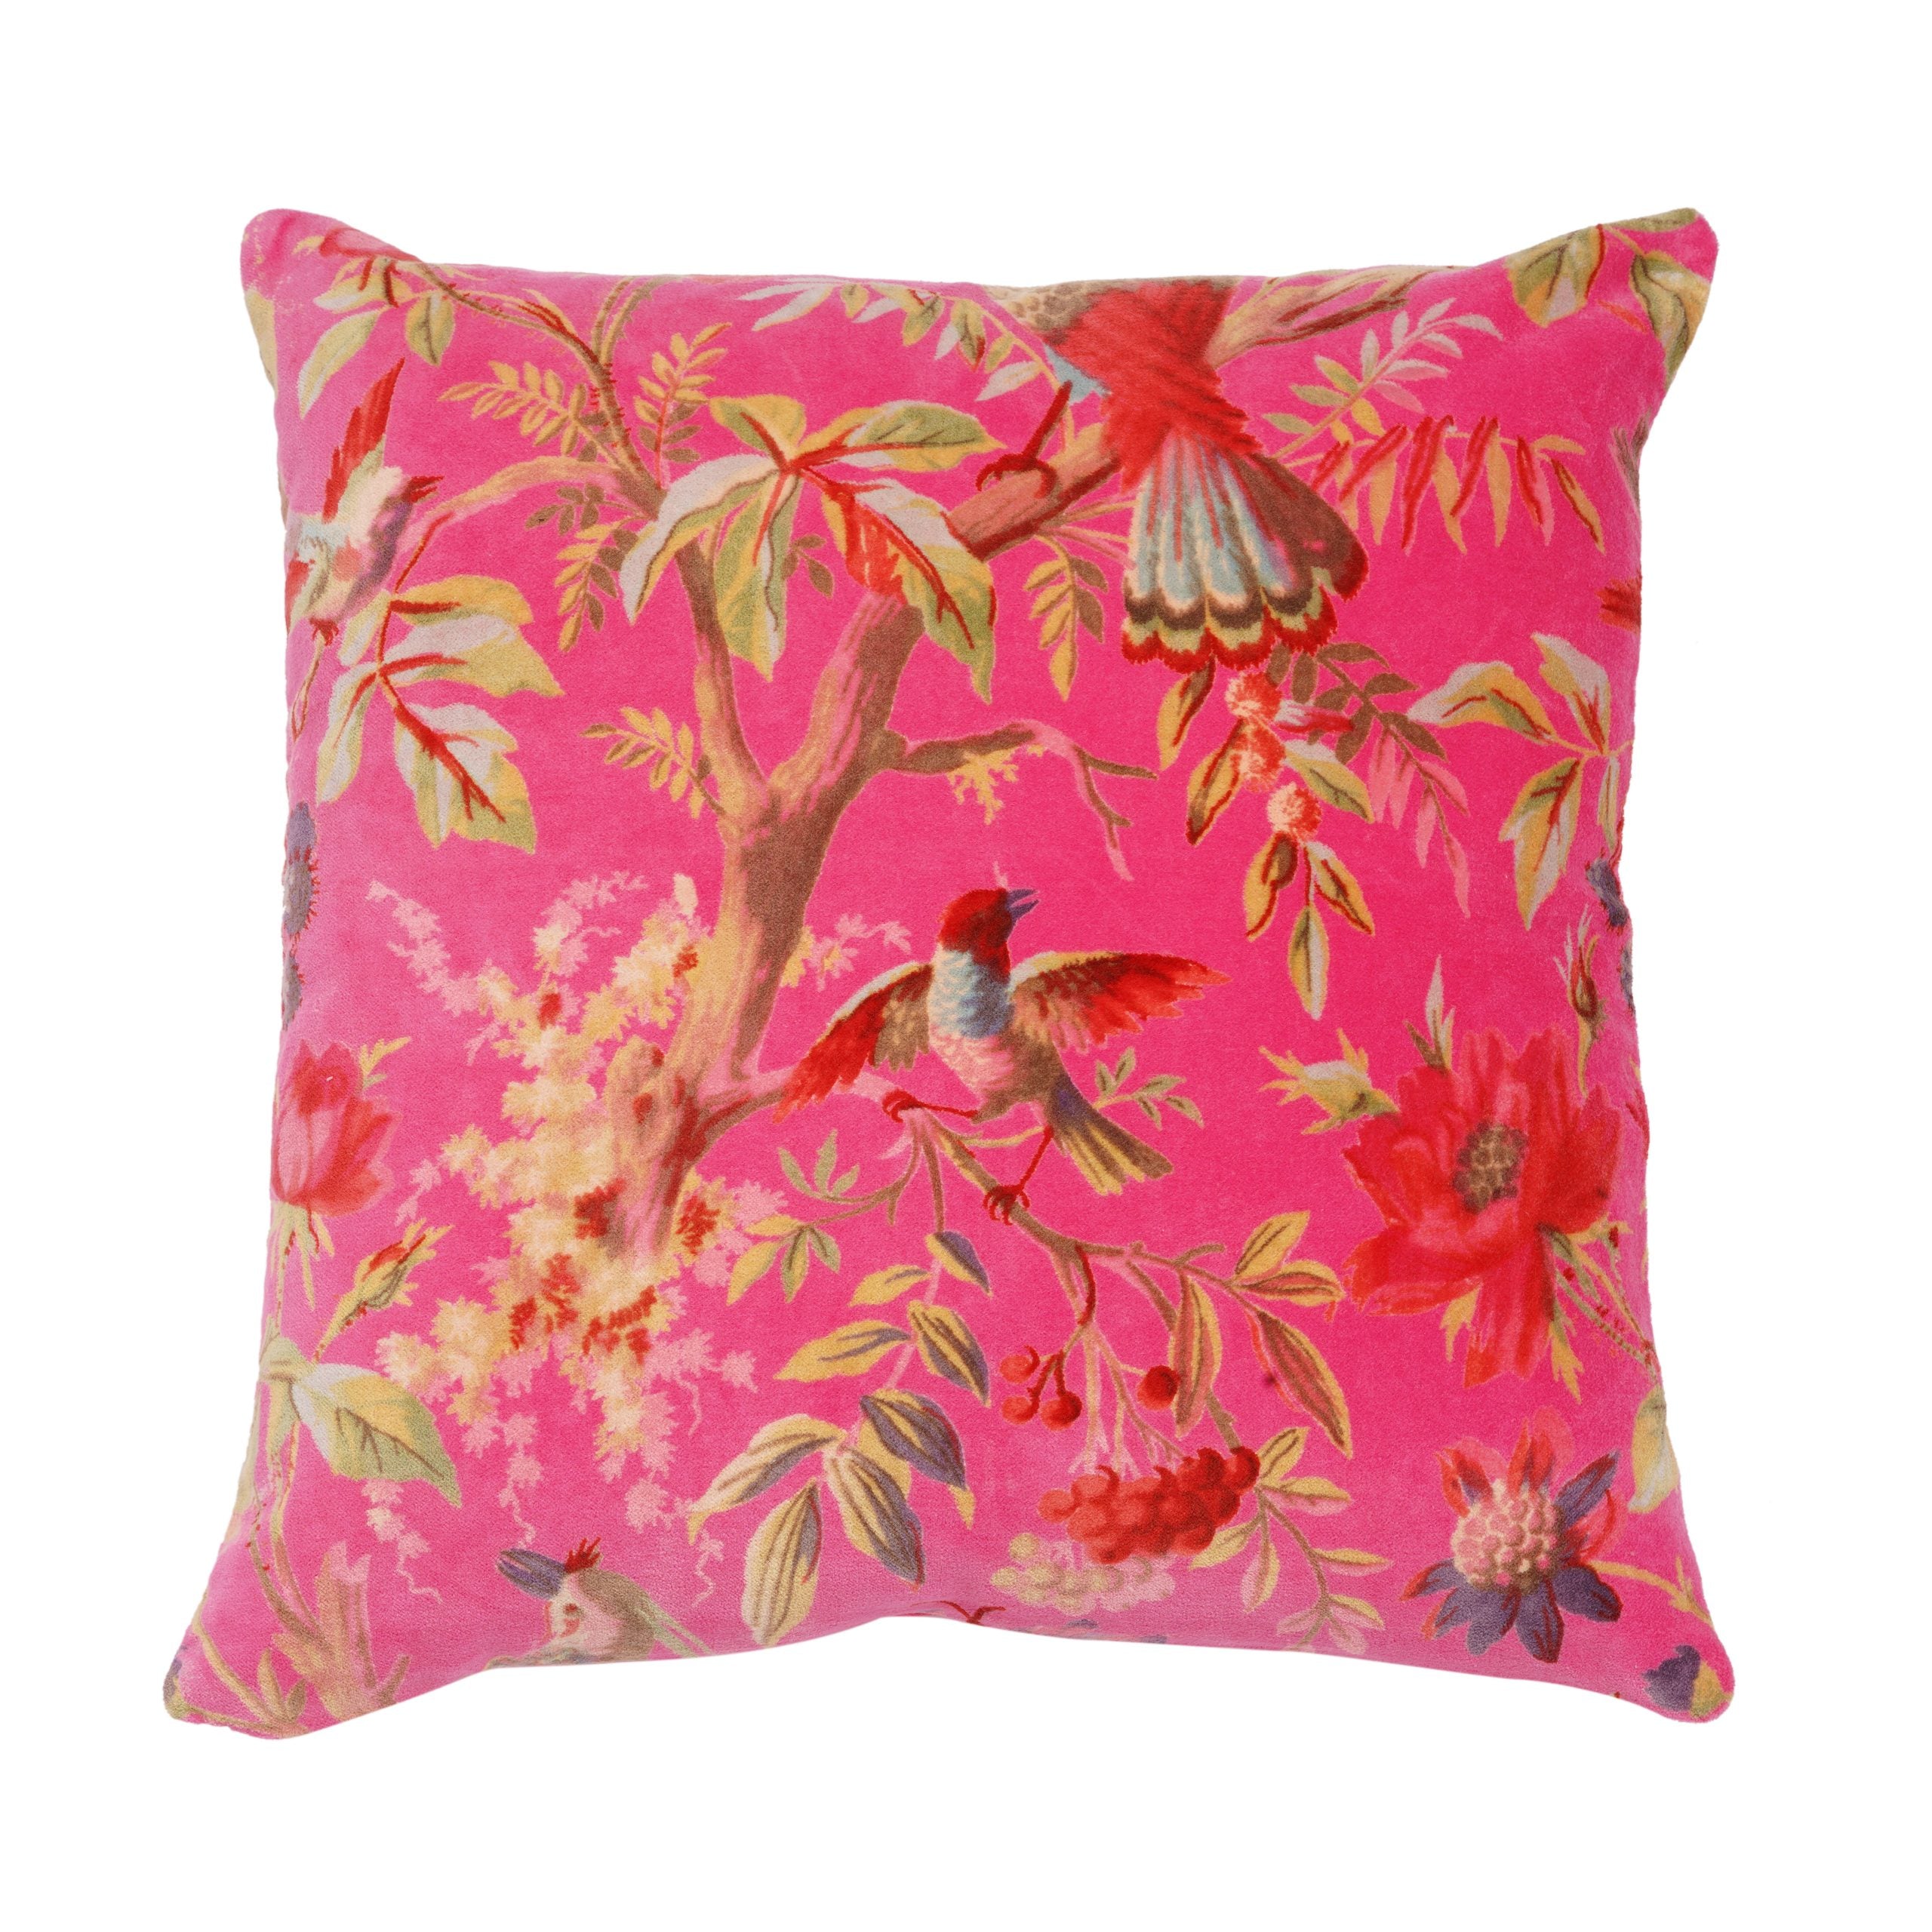 'Fly Me To Paradise' 100% Cotton Velvet Cushion Cover